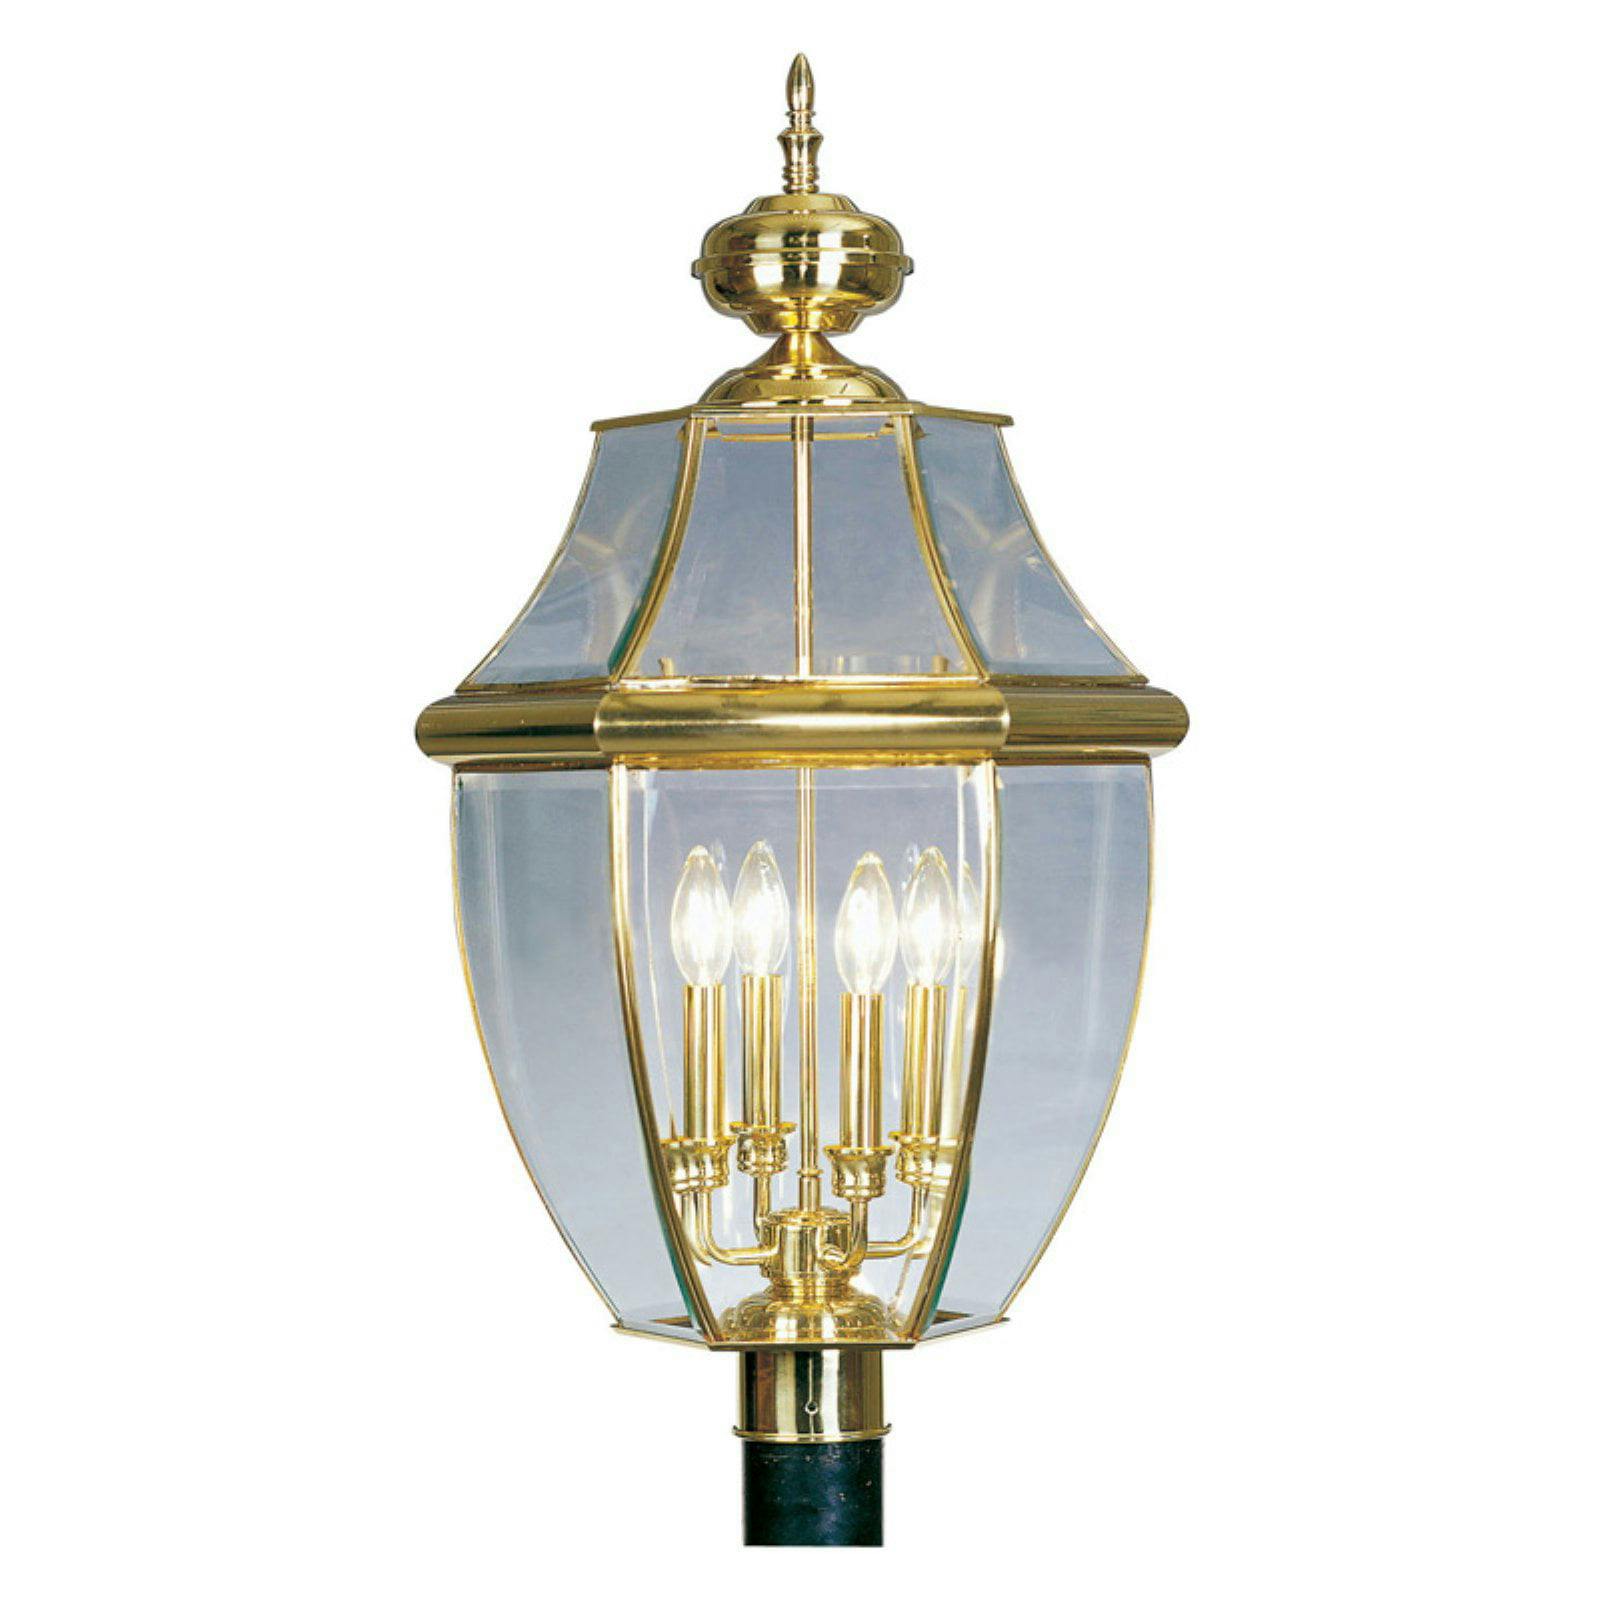 Monterey Colonial Style Polished Brass 4-Light Outdoor Lantern